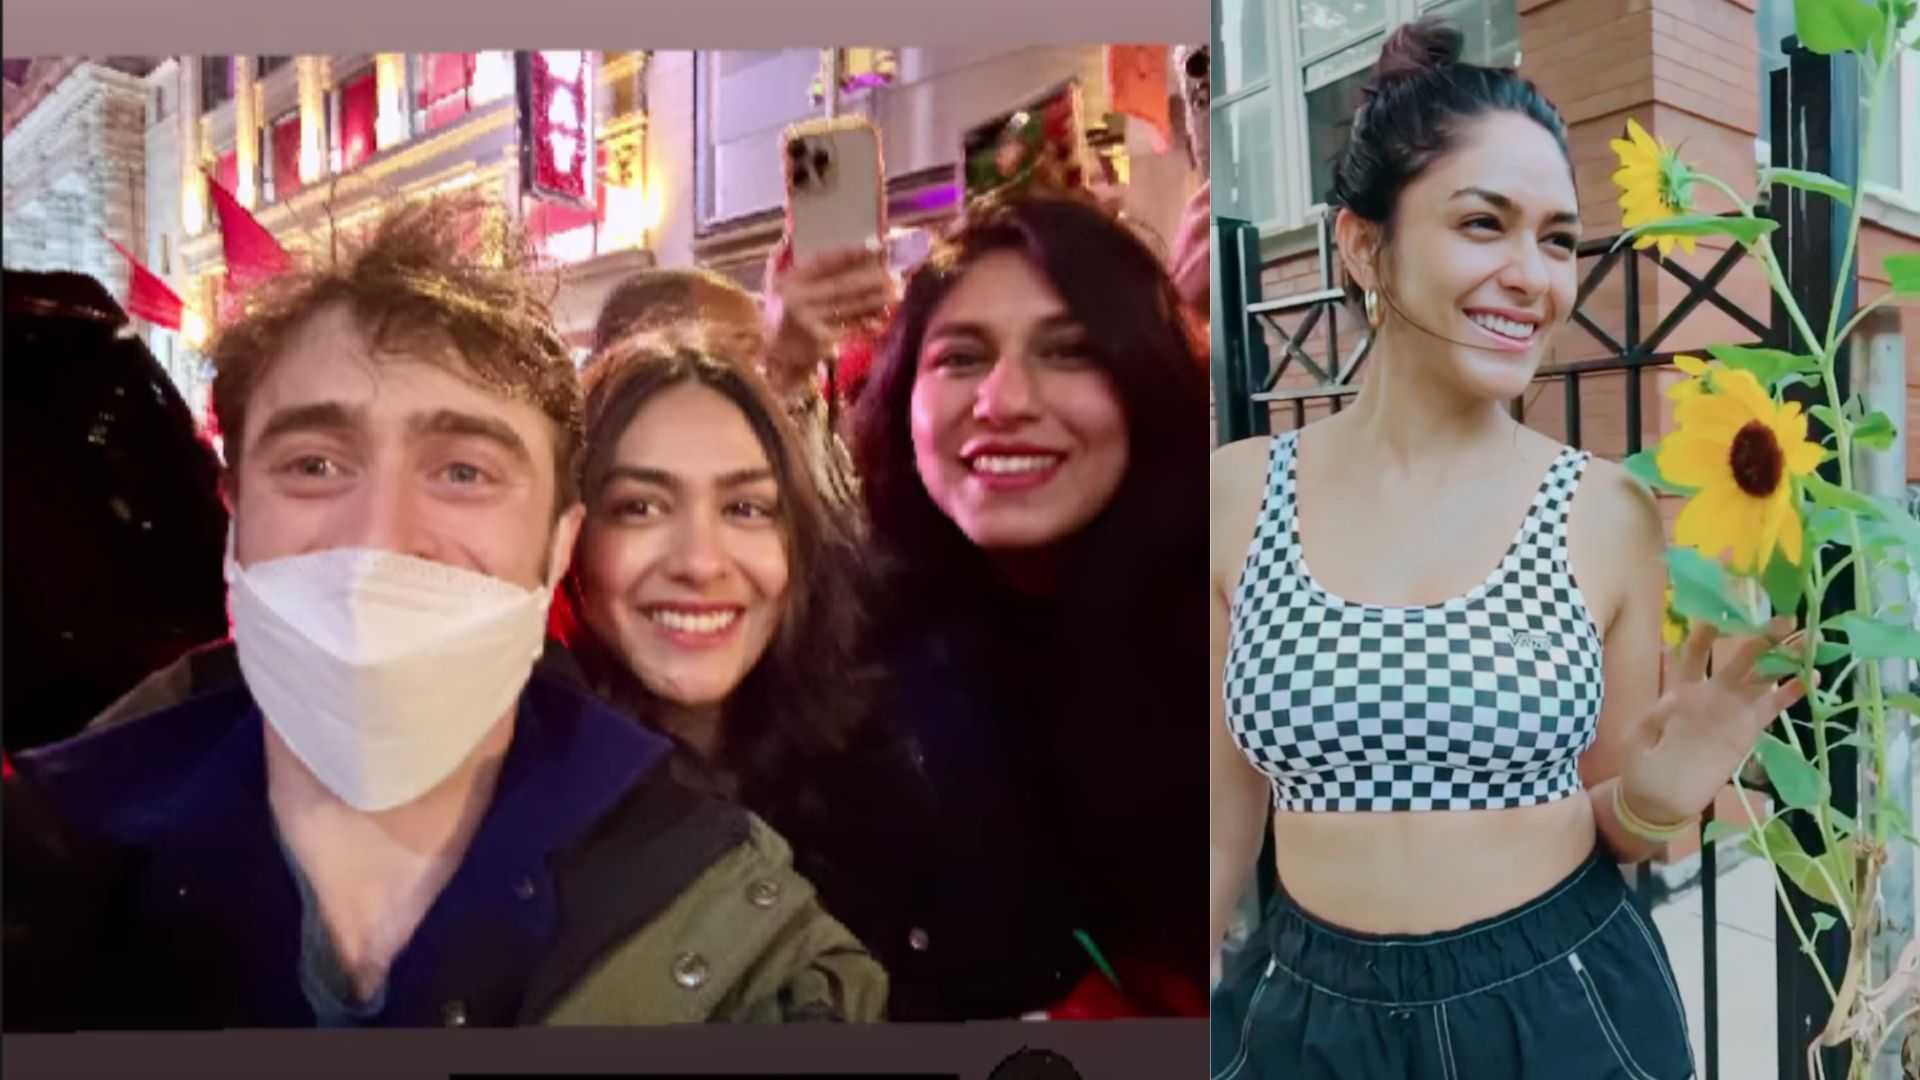 Mrunal Thakur shares her major fangirl moment as she bumps into Harry Potter star Daniel Radcliffe